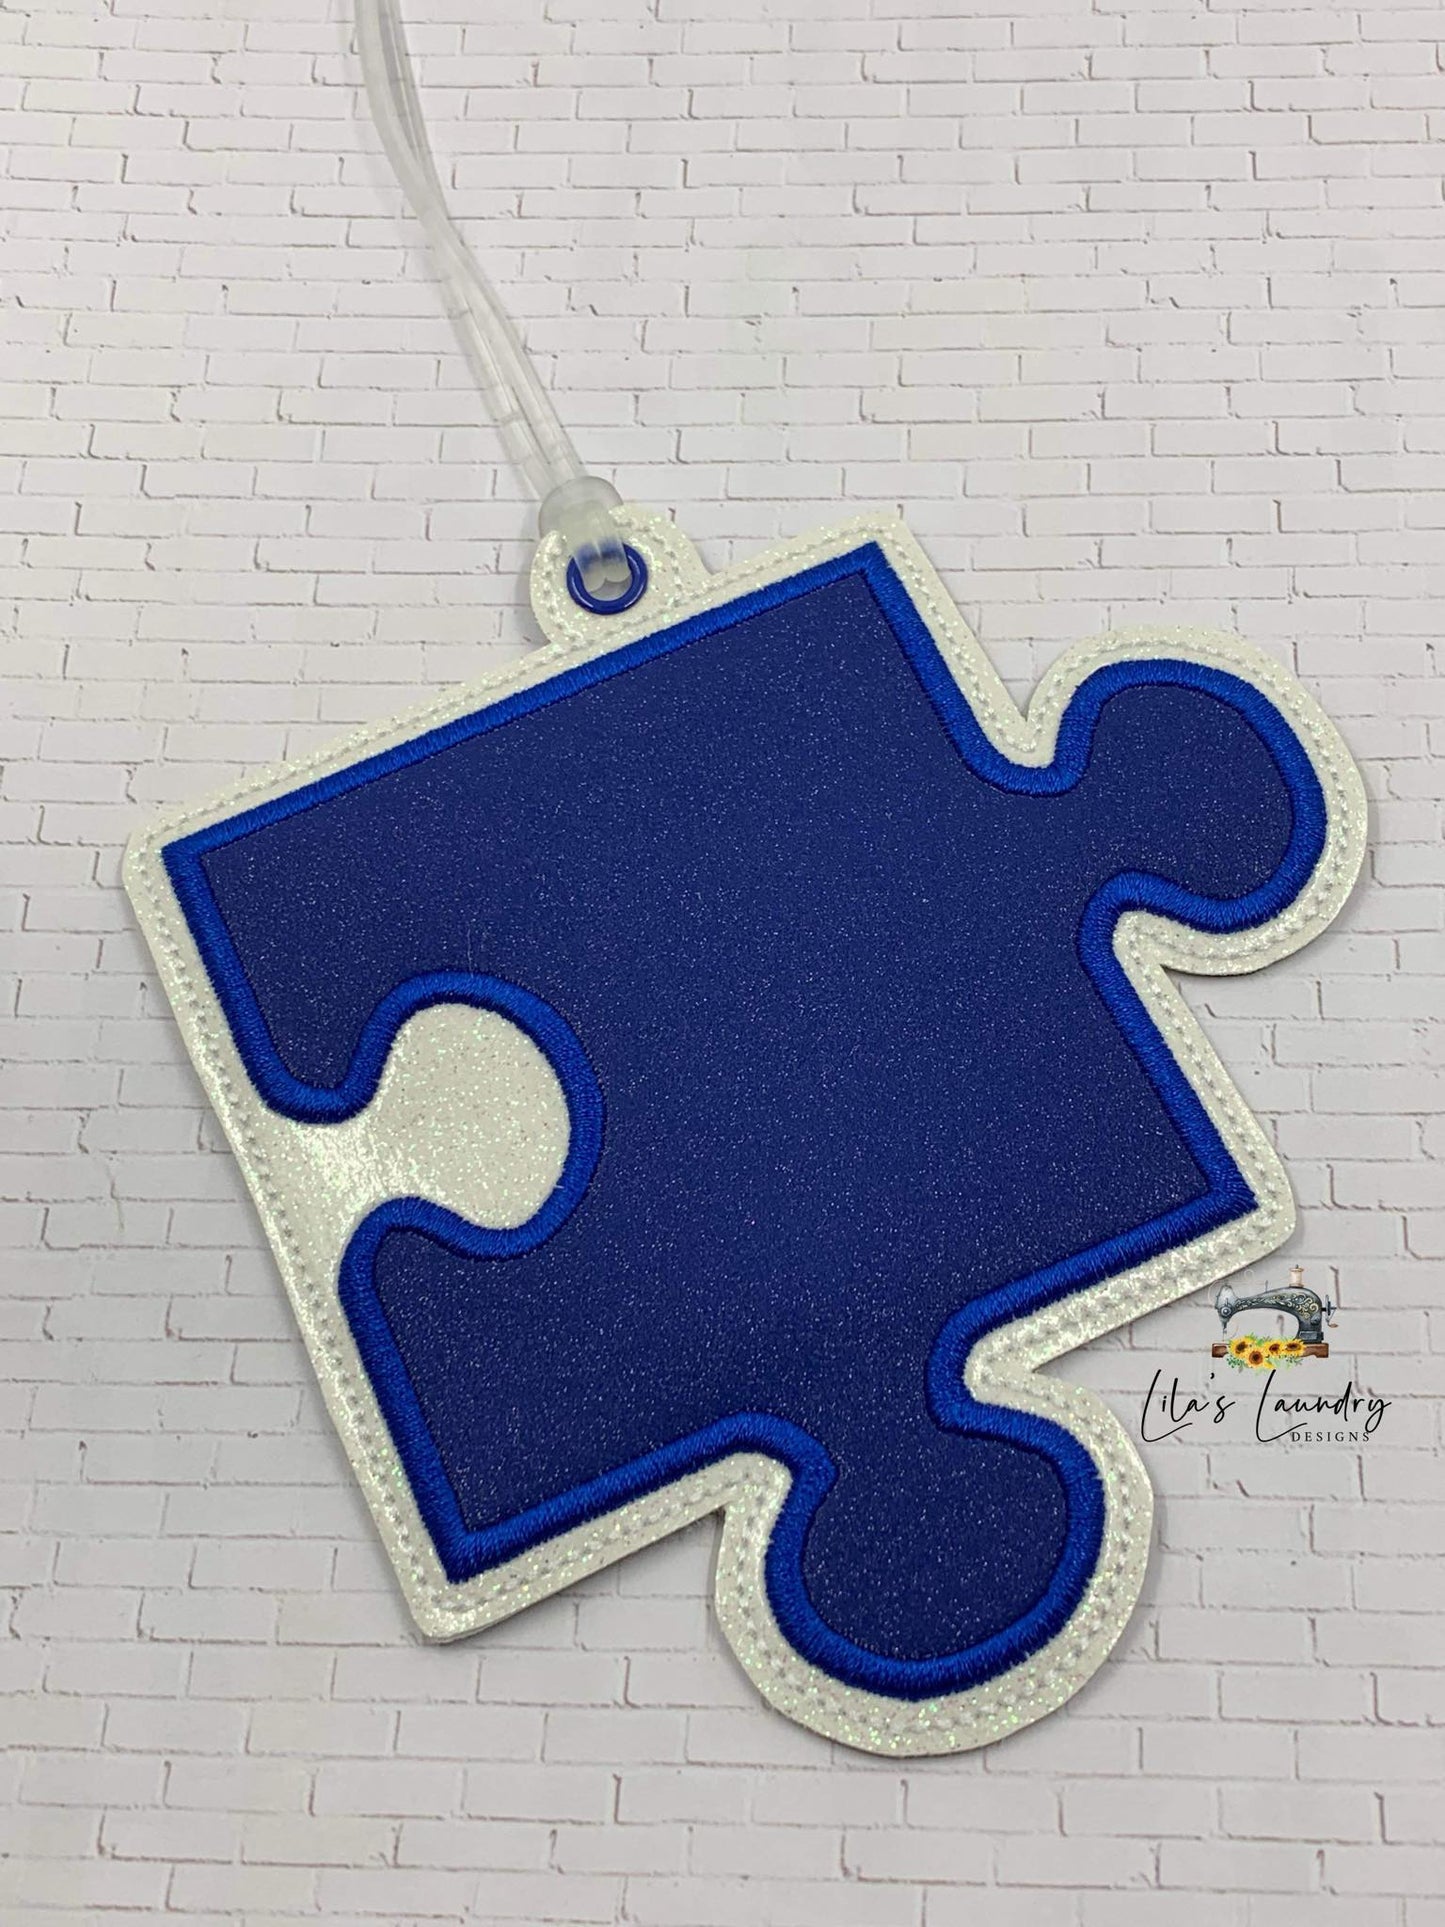 Large Puzzle Piece Bag Tag - 5x7 only - Digital Embroidery Design